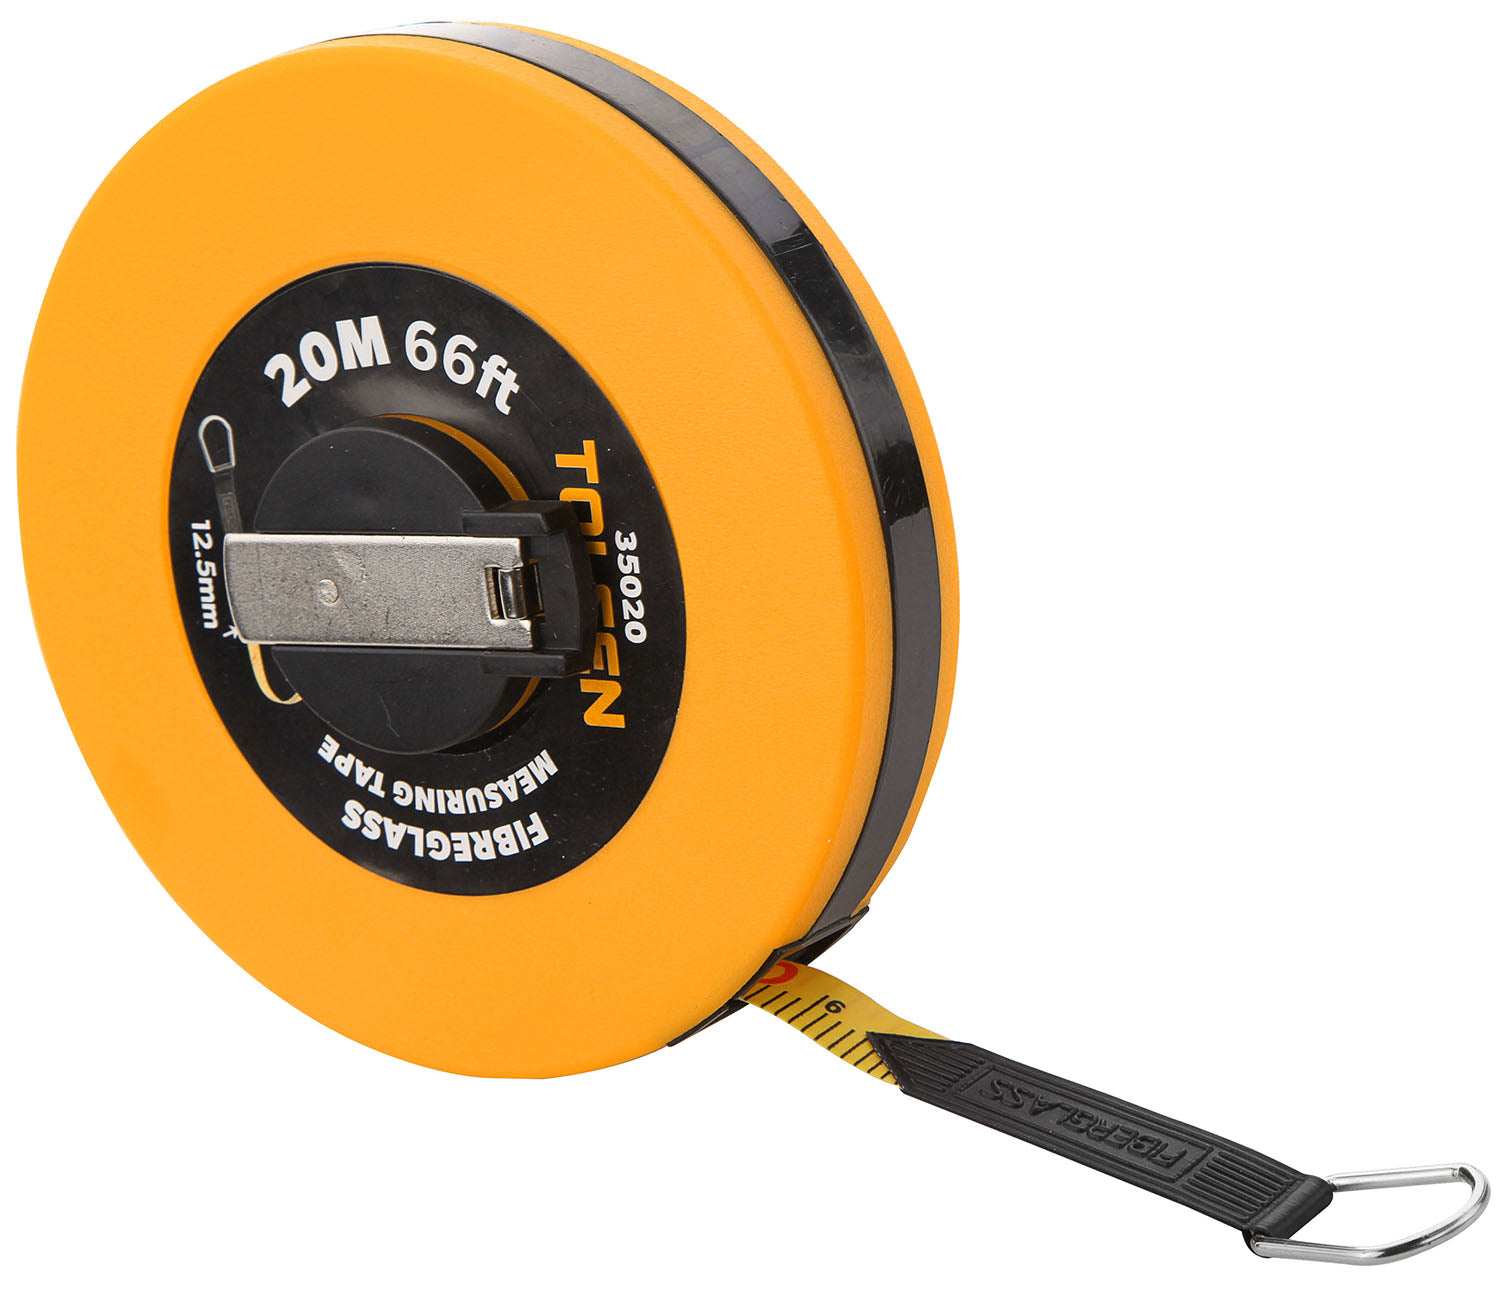 National Tape Measure Day - July 14, 2024